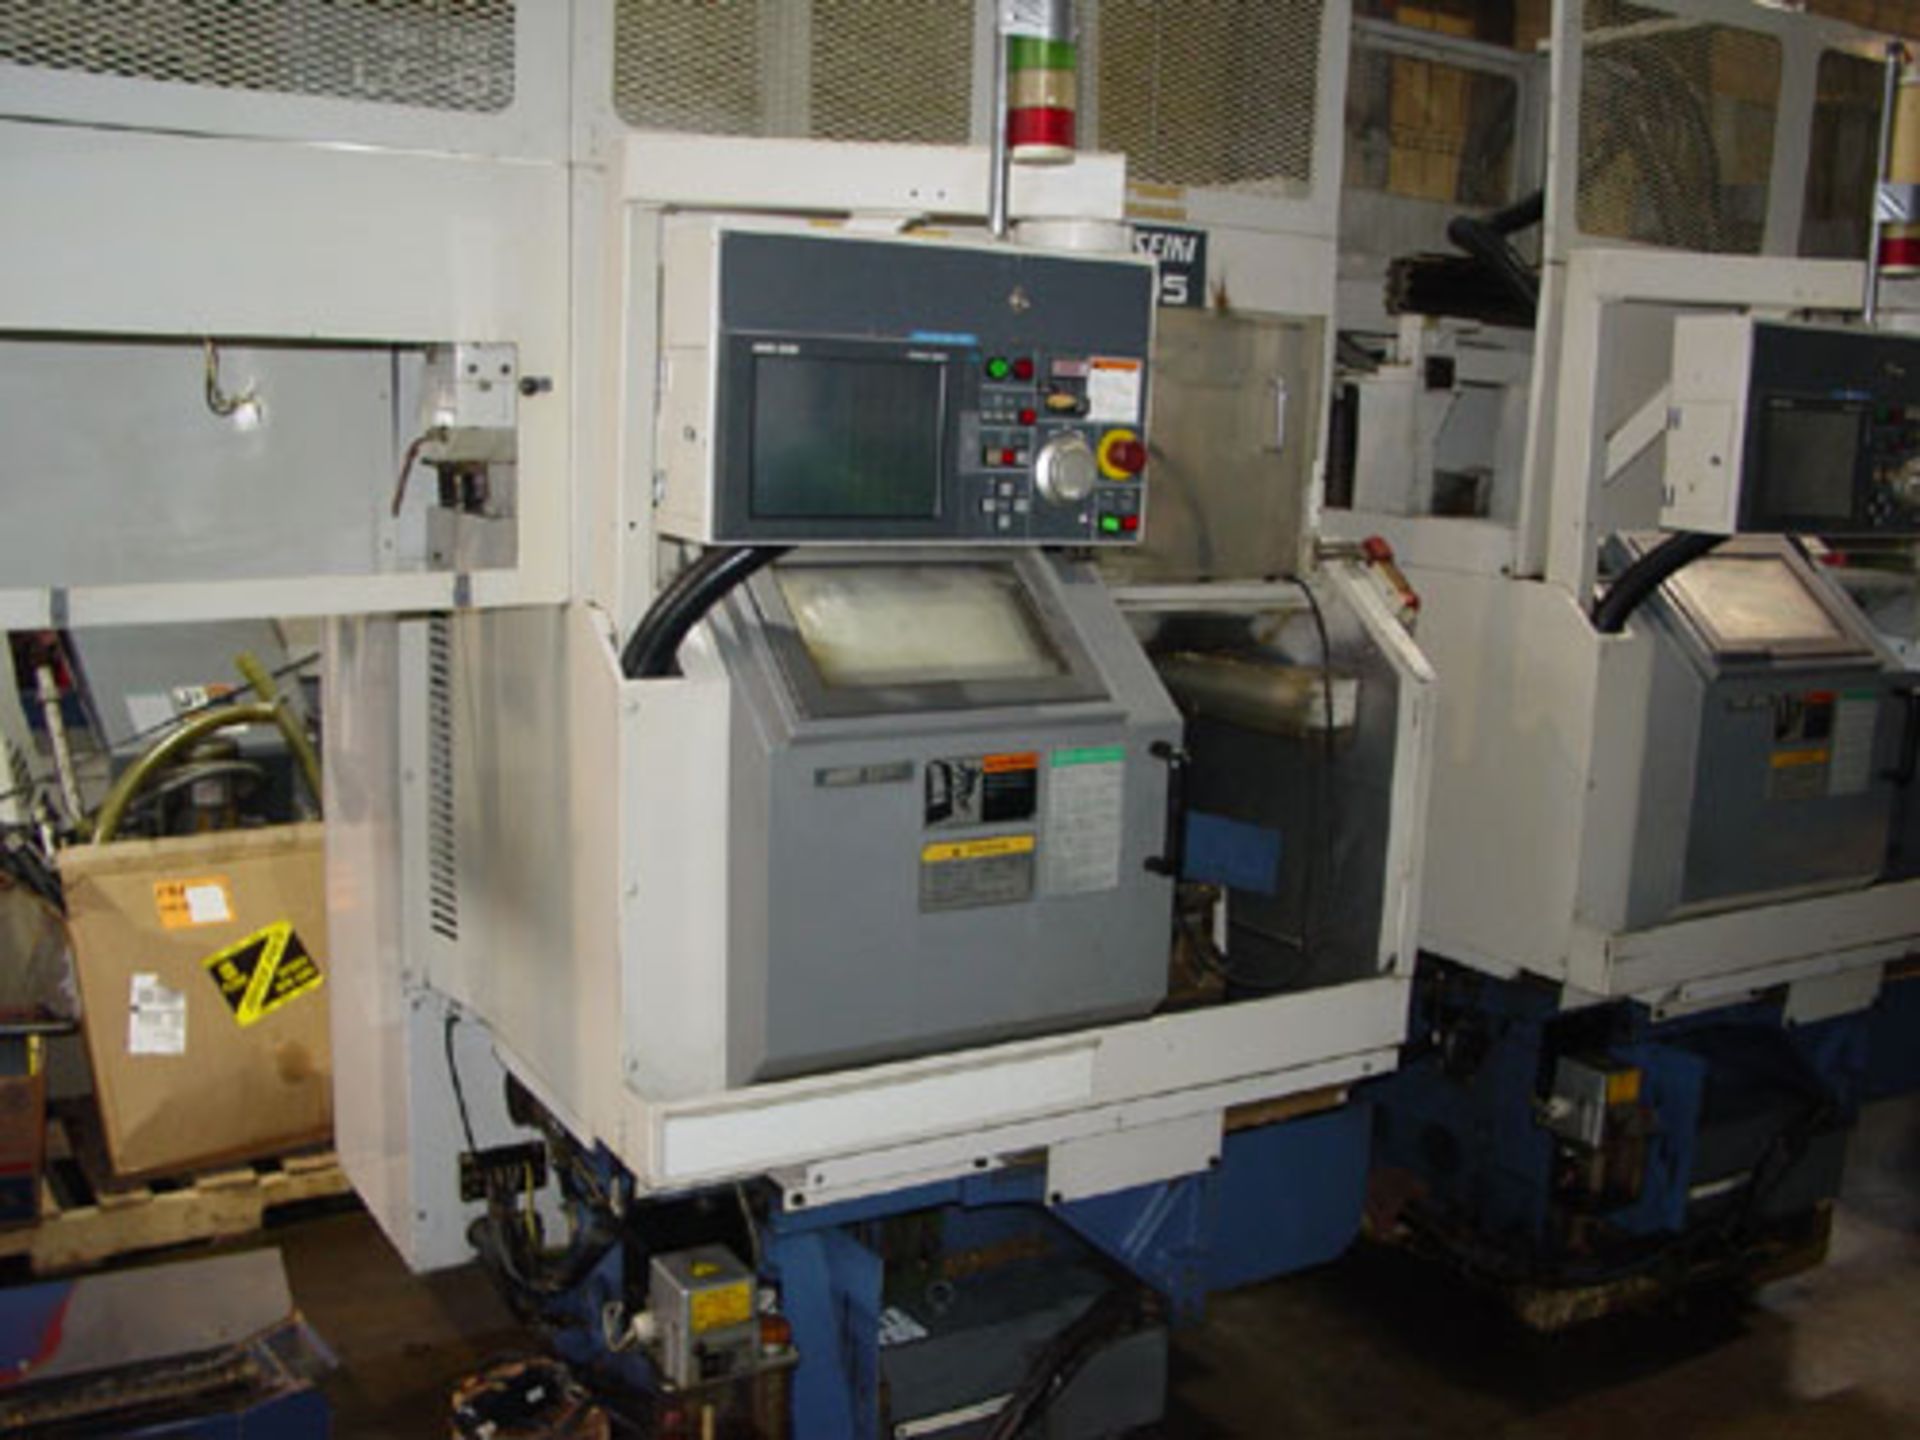 MORI SEIKI CL-05 CNC GANG STYLE CNC LATHE WITH ROBOT LOADER, YEAR 1996, SN 125 , LOCATION OHIO